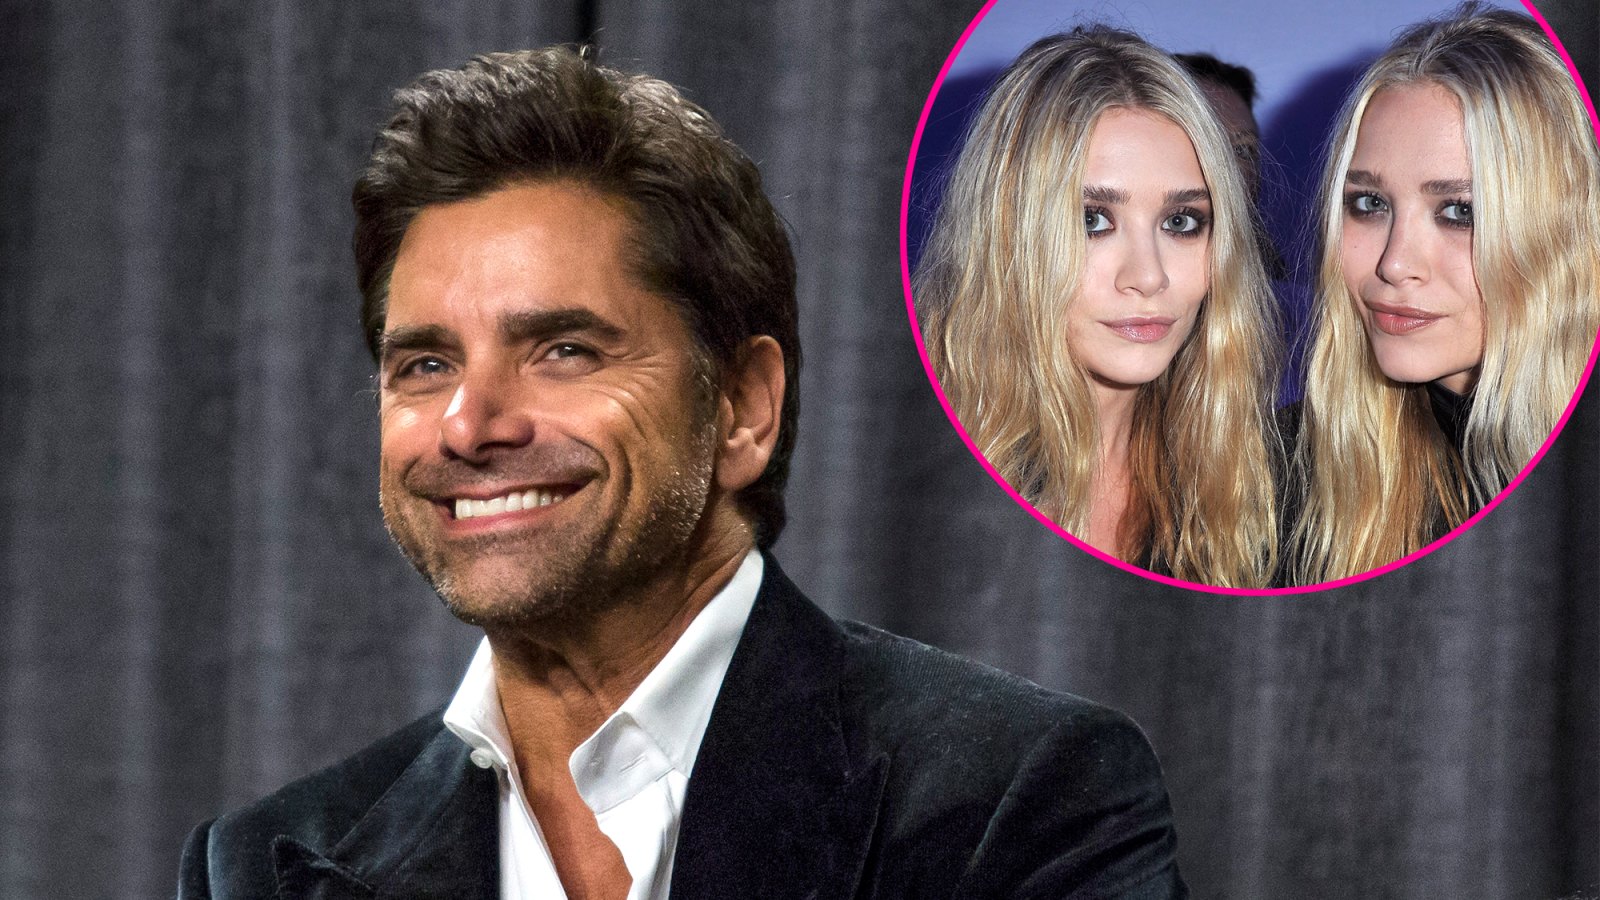 John Stamos Says Knowing Mary-Kate and Ashley Olsen Is ‘One of the Greatest Joys of My Life’